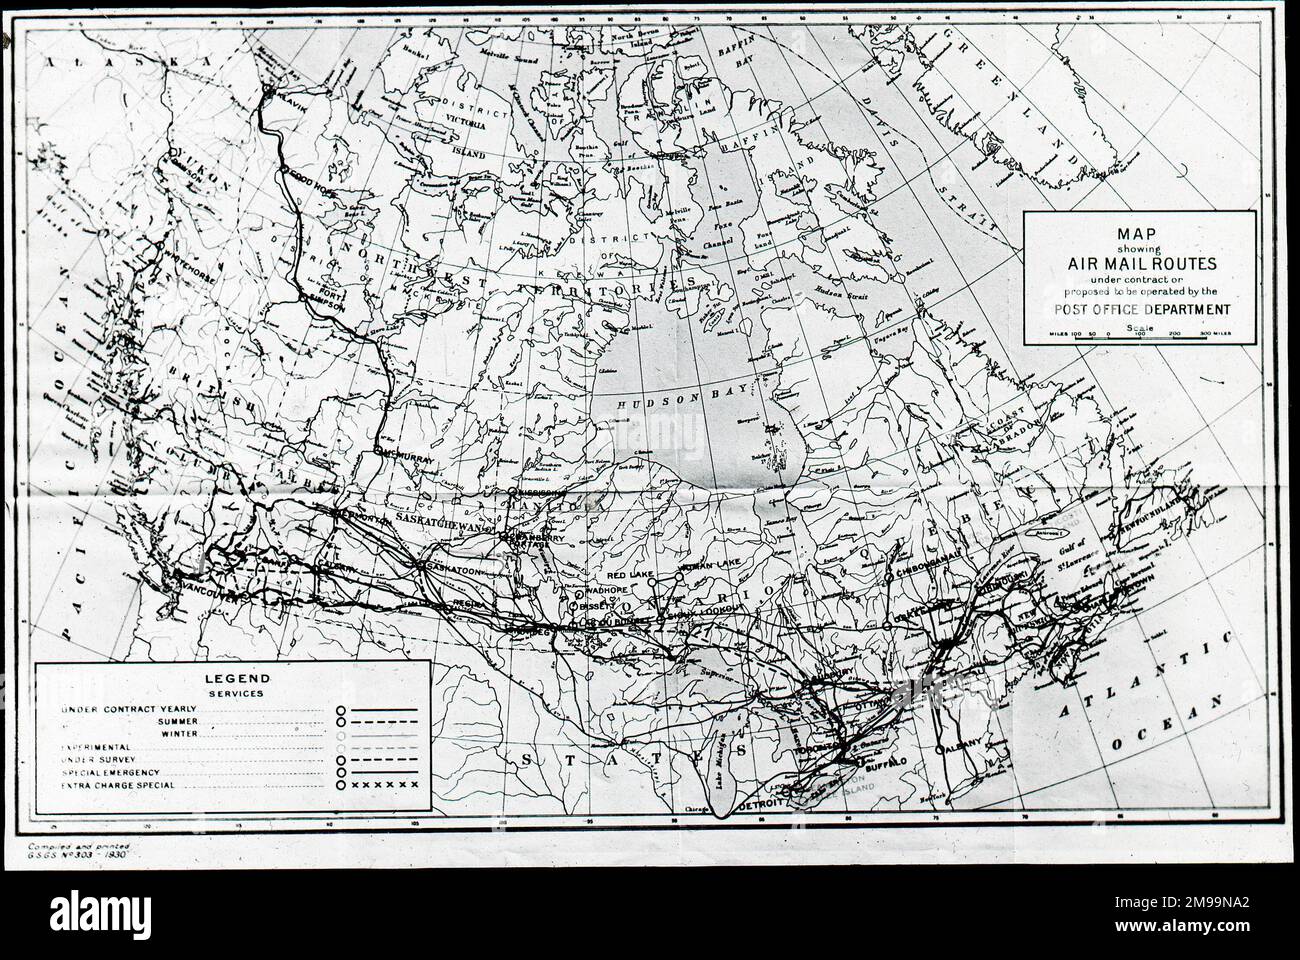 Map showing air mail routes proposed to be operated by the Post Office Department. William Francis Forbes-Sempill, 19th Lord Sempill AFC, AFRAeS (1893-1965) was a Scottish peer and record-breaking air pioneer who was later shown to have passed secret information to the Imperial Japanese military before the Second World War. In 1921, Sempill led an official military mission to Japan that showcased the latest British aircraft. In subsequent years he continued to aid the Imperial Japanese Navy in developing its Navy Air Service and began giving military secrets to the Japanese. Although his act Stock Photo